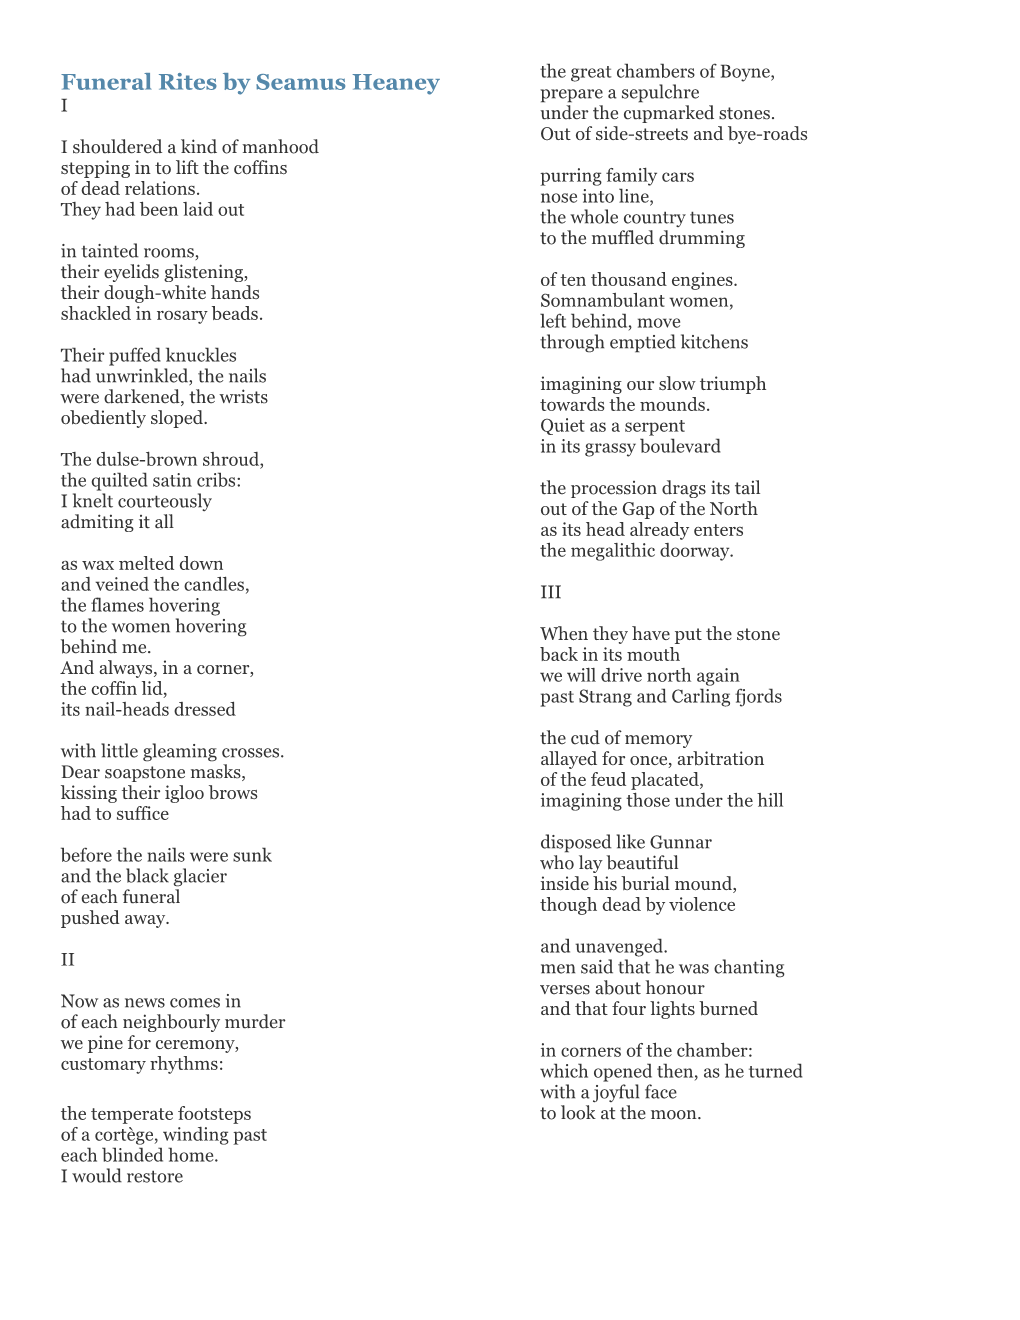 Funeral Rites by Seamus Heaney I I Shouldered a Kind of Manhood Stepping in to Lift The